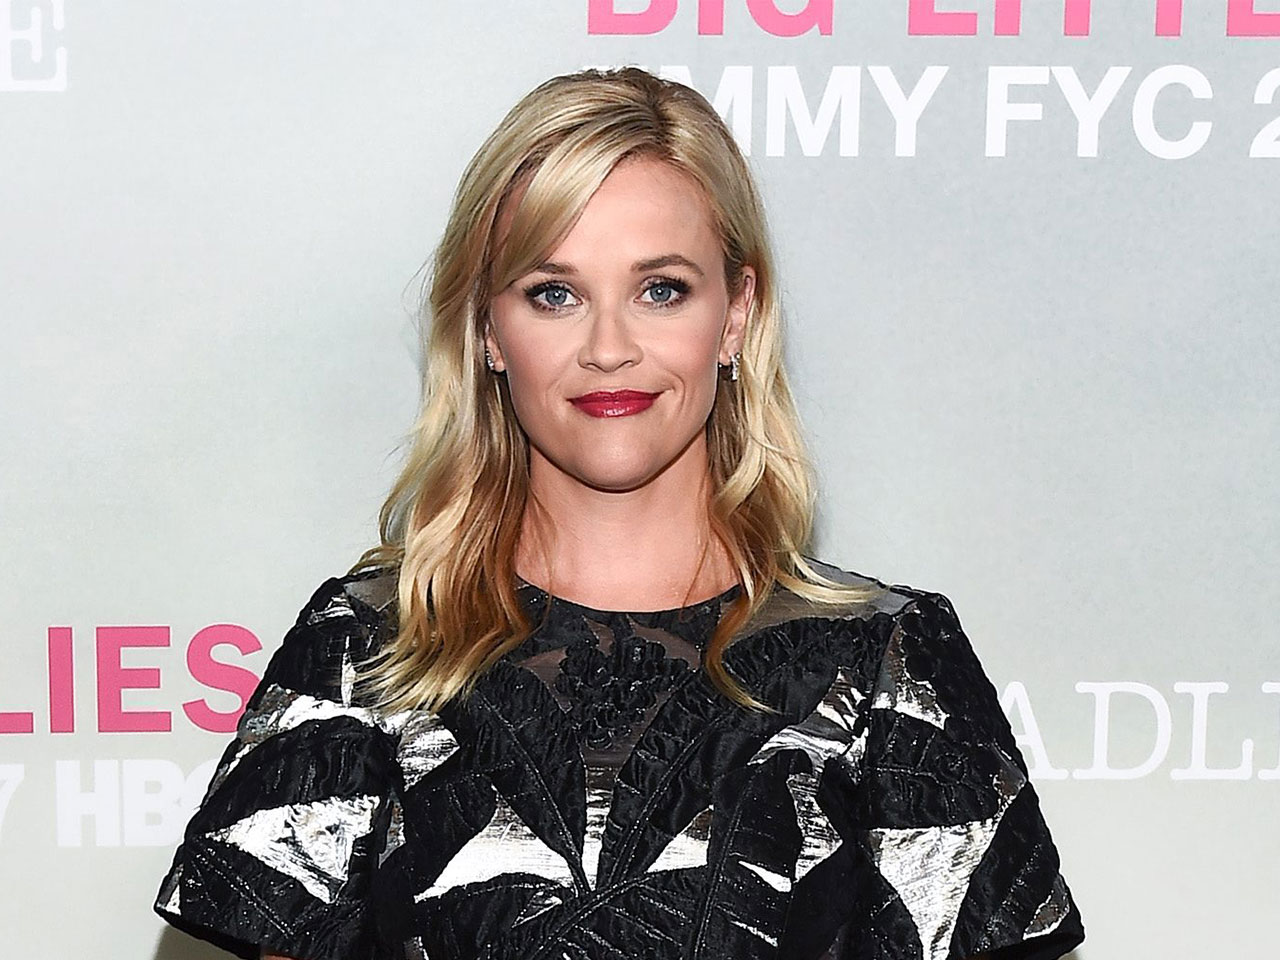 Reese Witherspoon on women's ambition